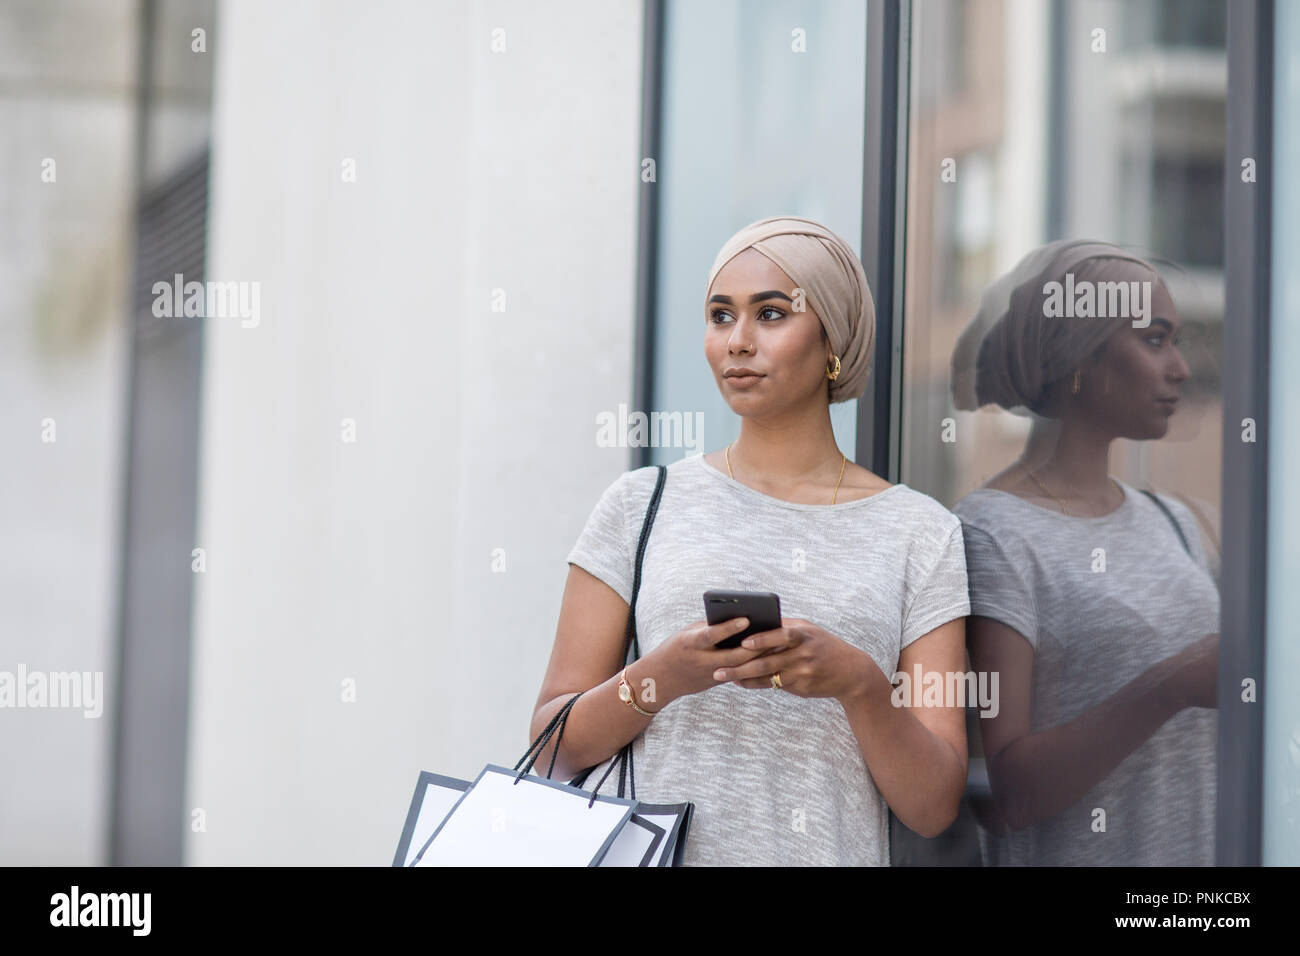 Muslim woman using a smartphone on a shopping trip Stock Photo